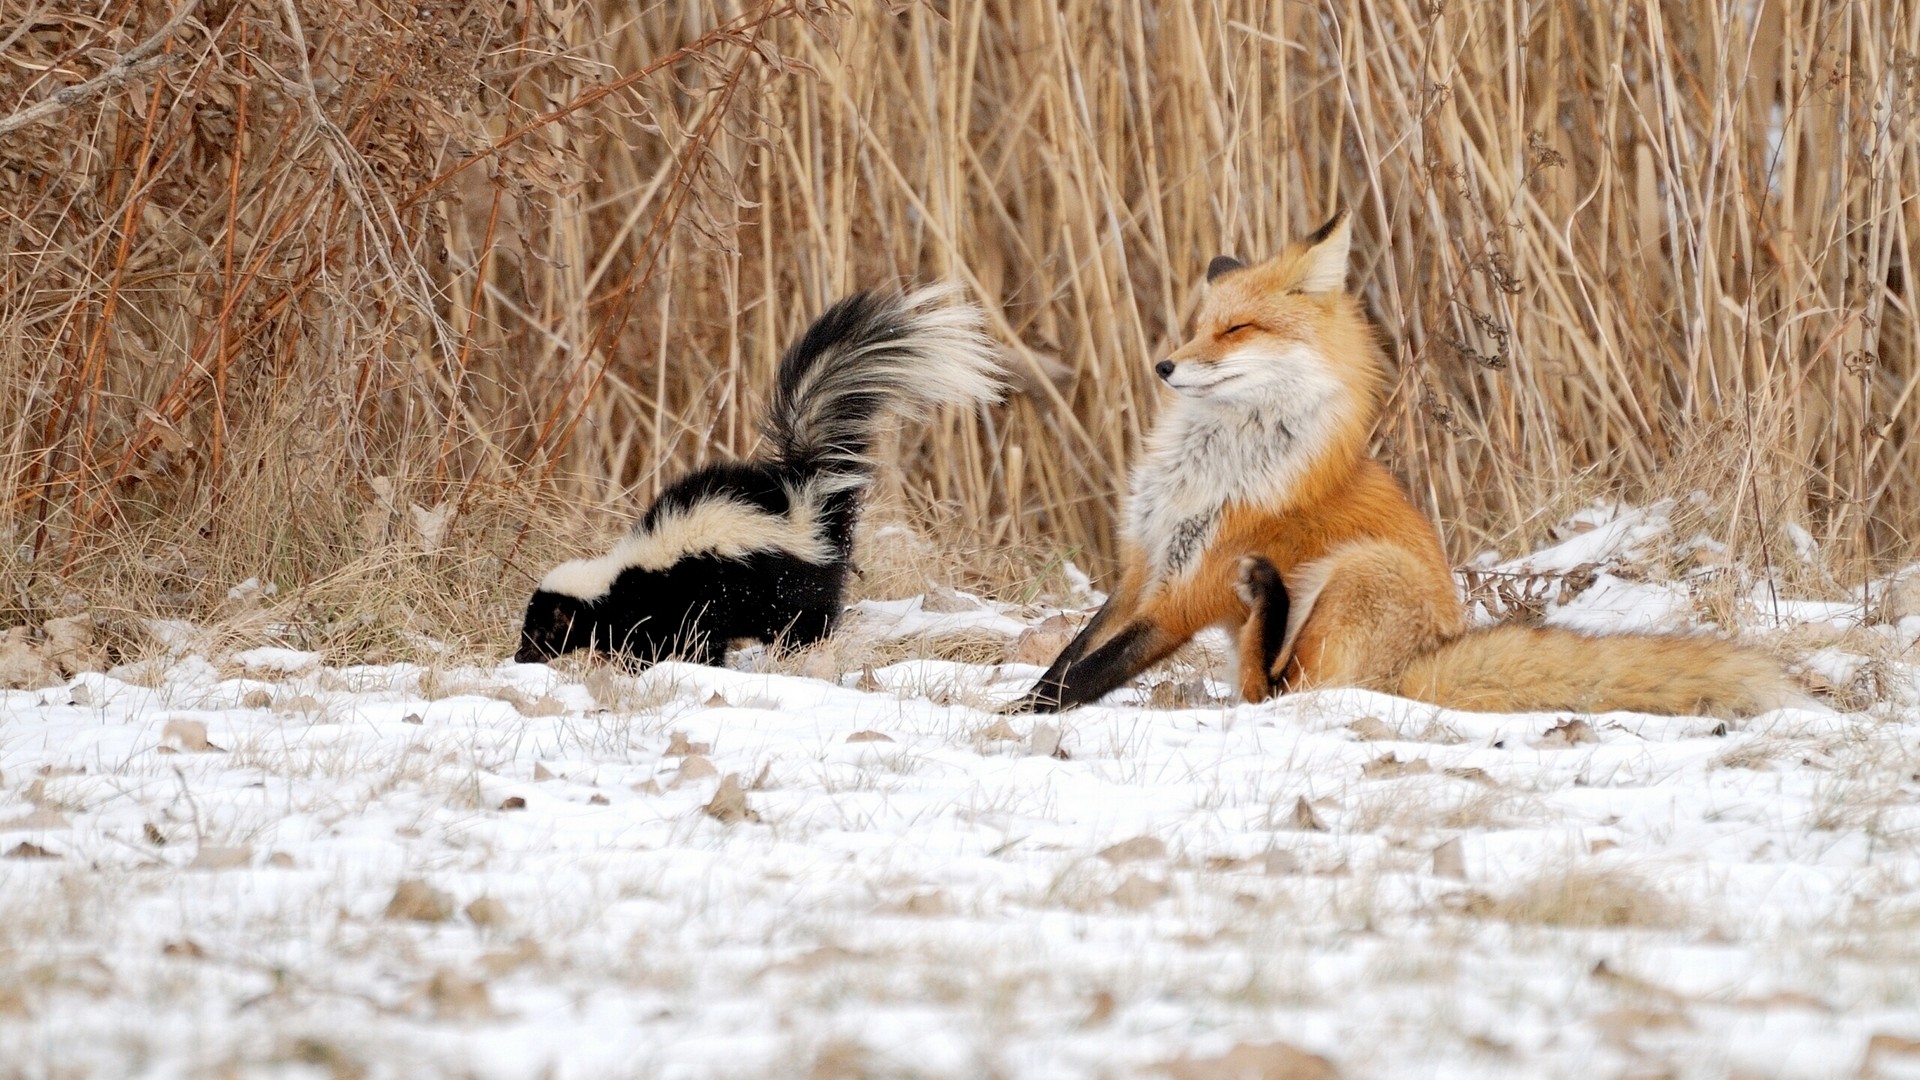 Funny Image Of Skunk Beside Reeds On Winter HD 1080p